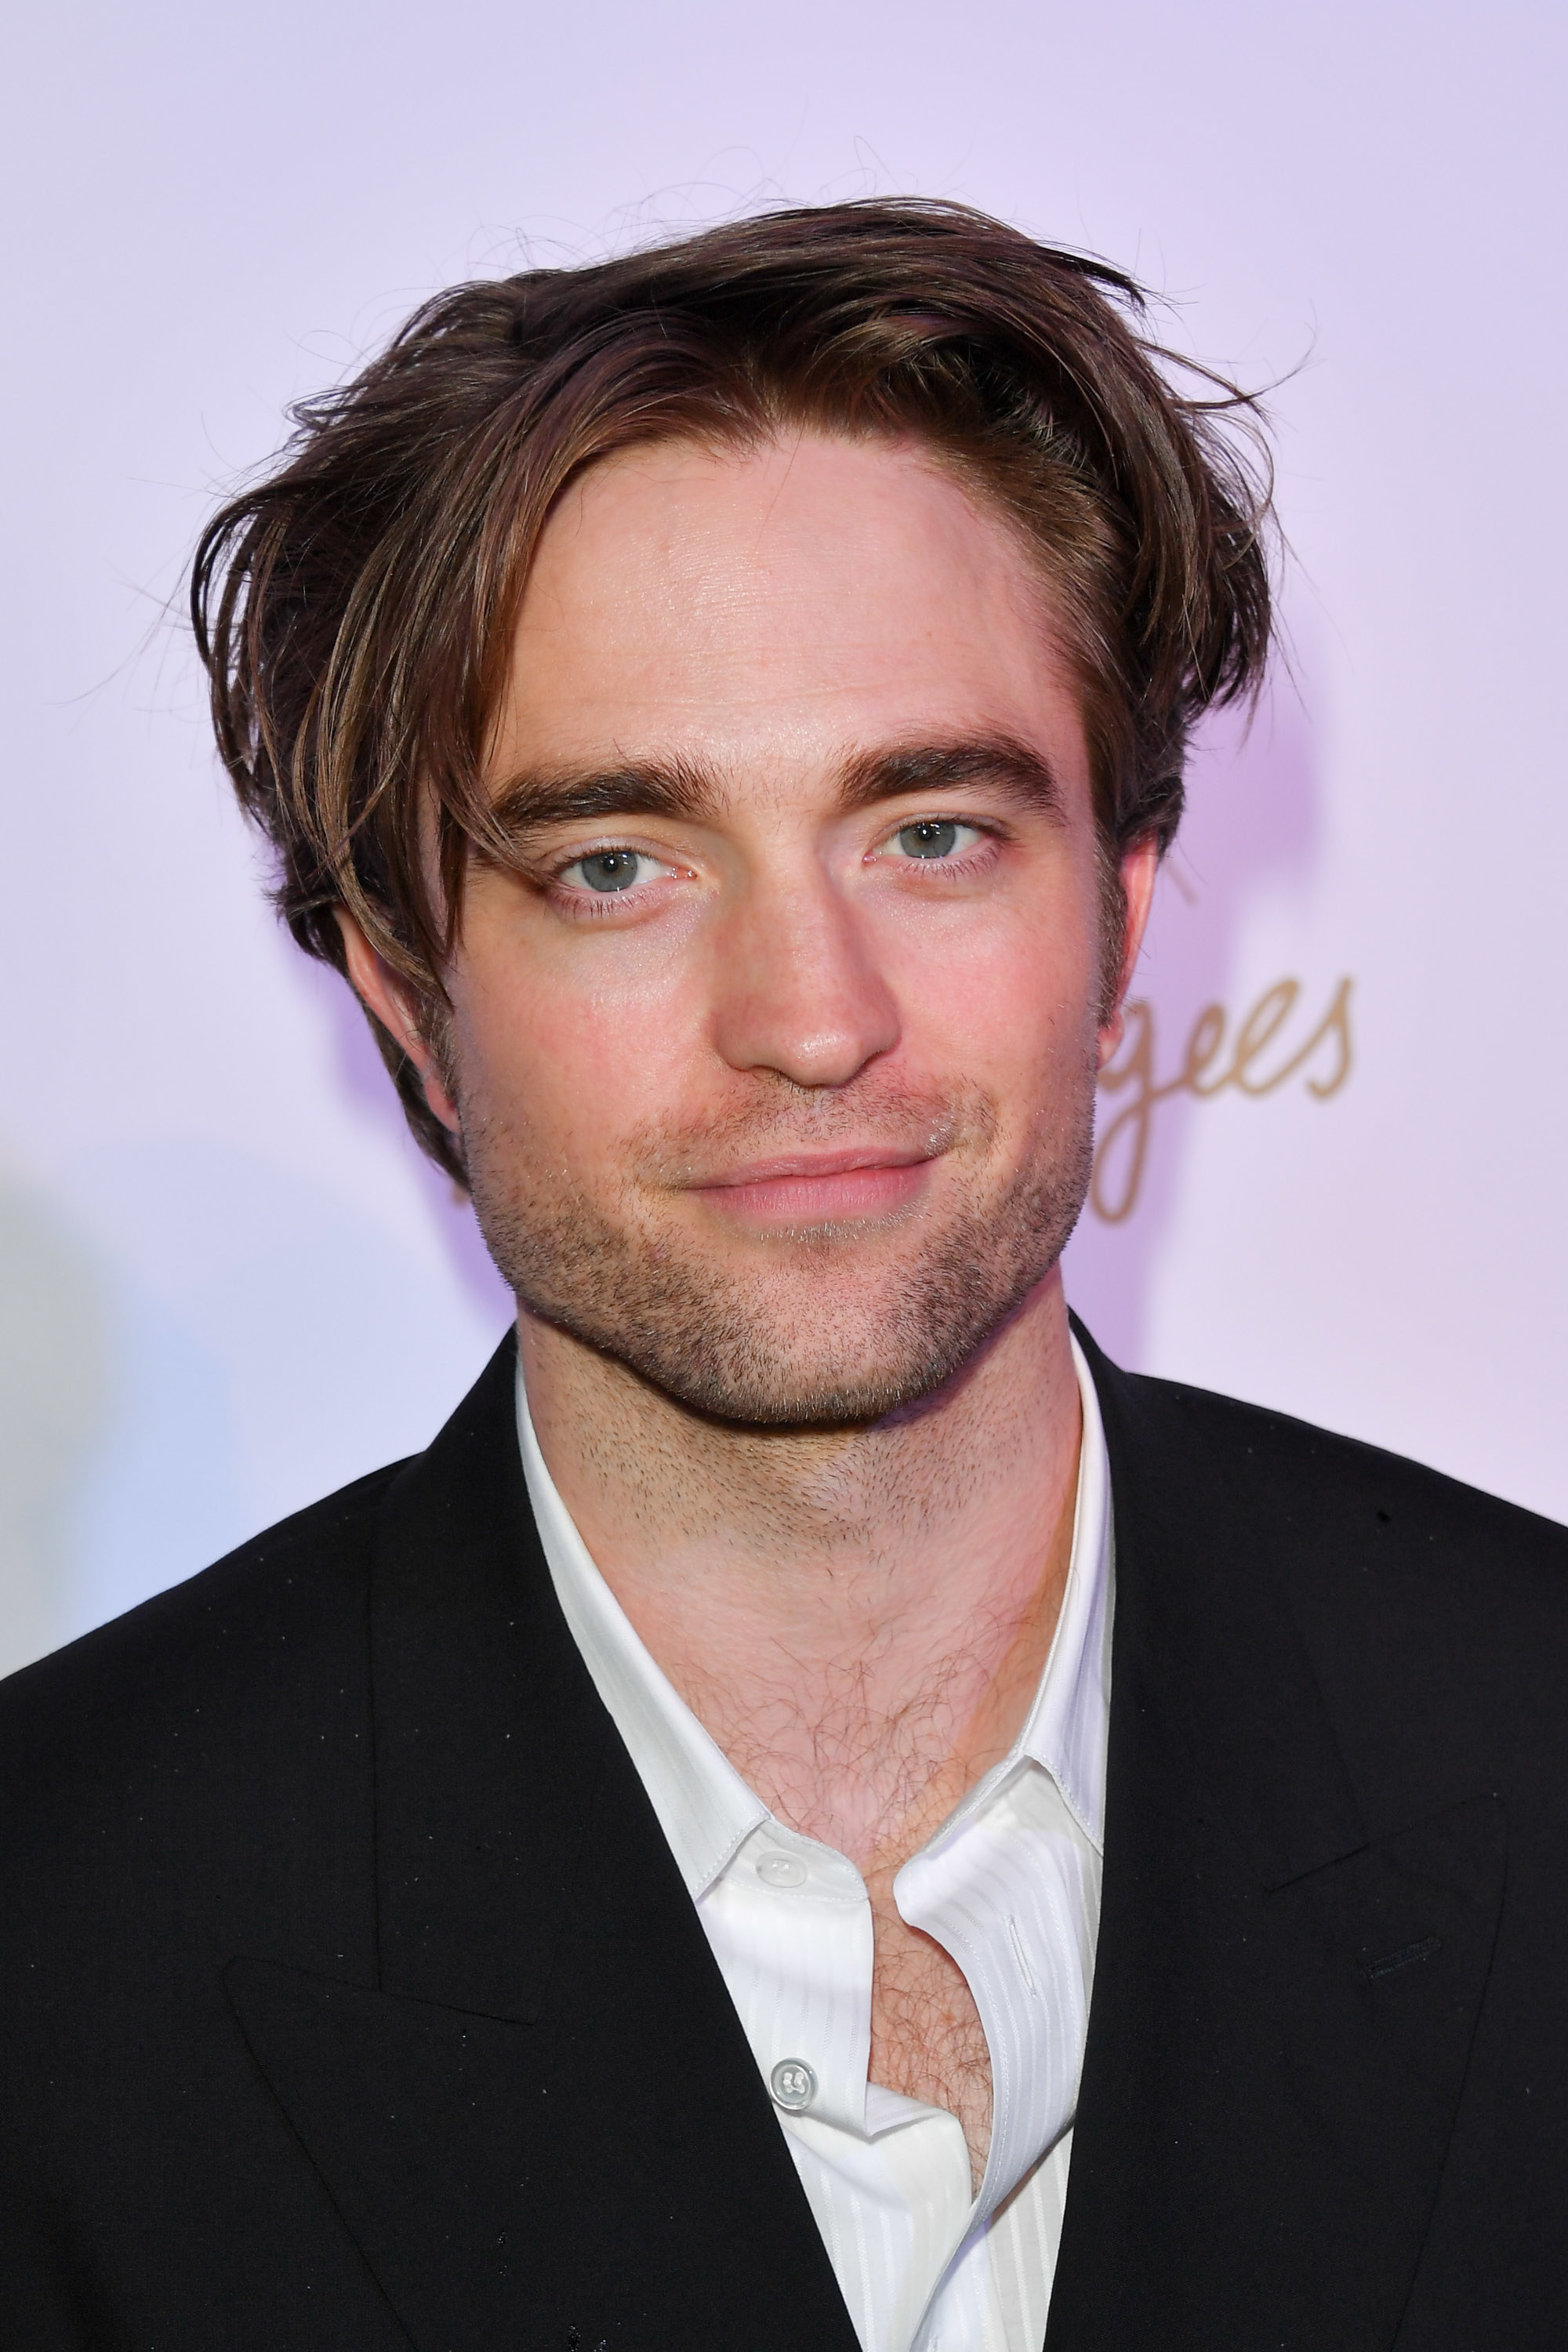 Robert Pattinson Debuts a New Undercut Haircut With a Soul Patch in the  Back | Glamour